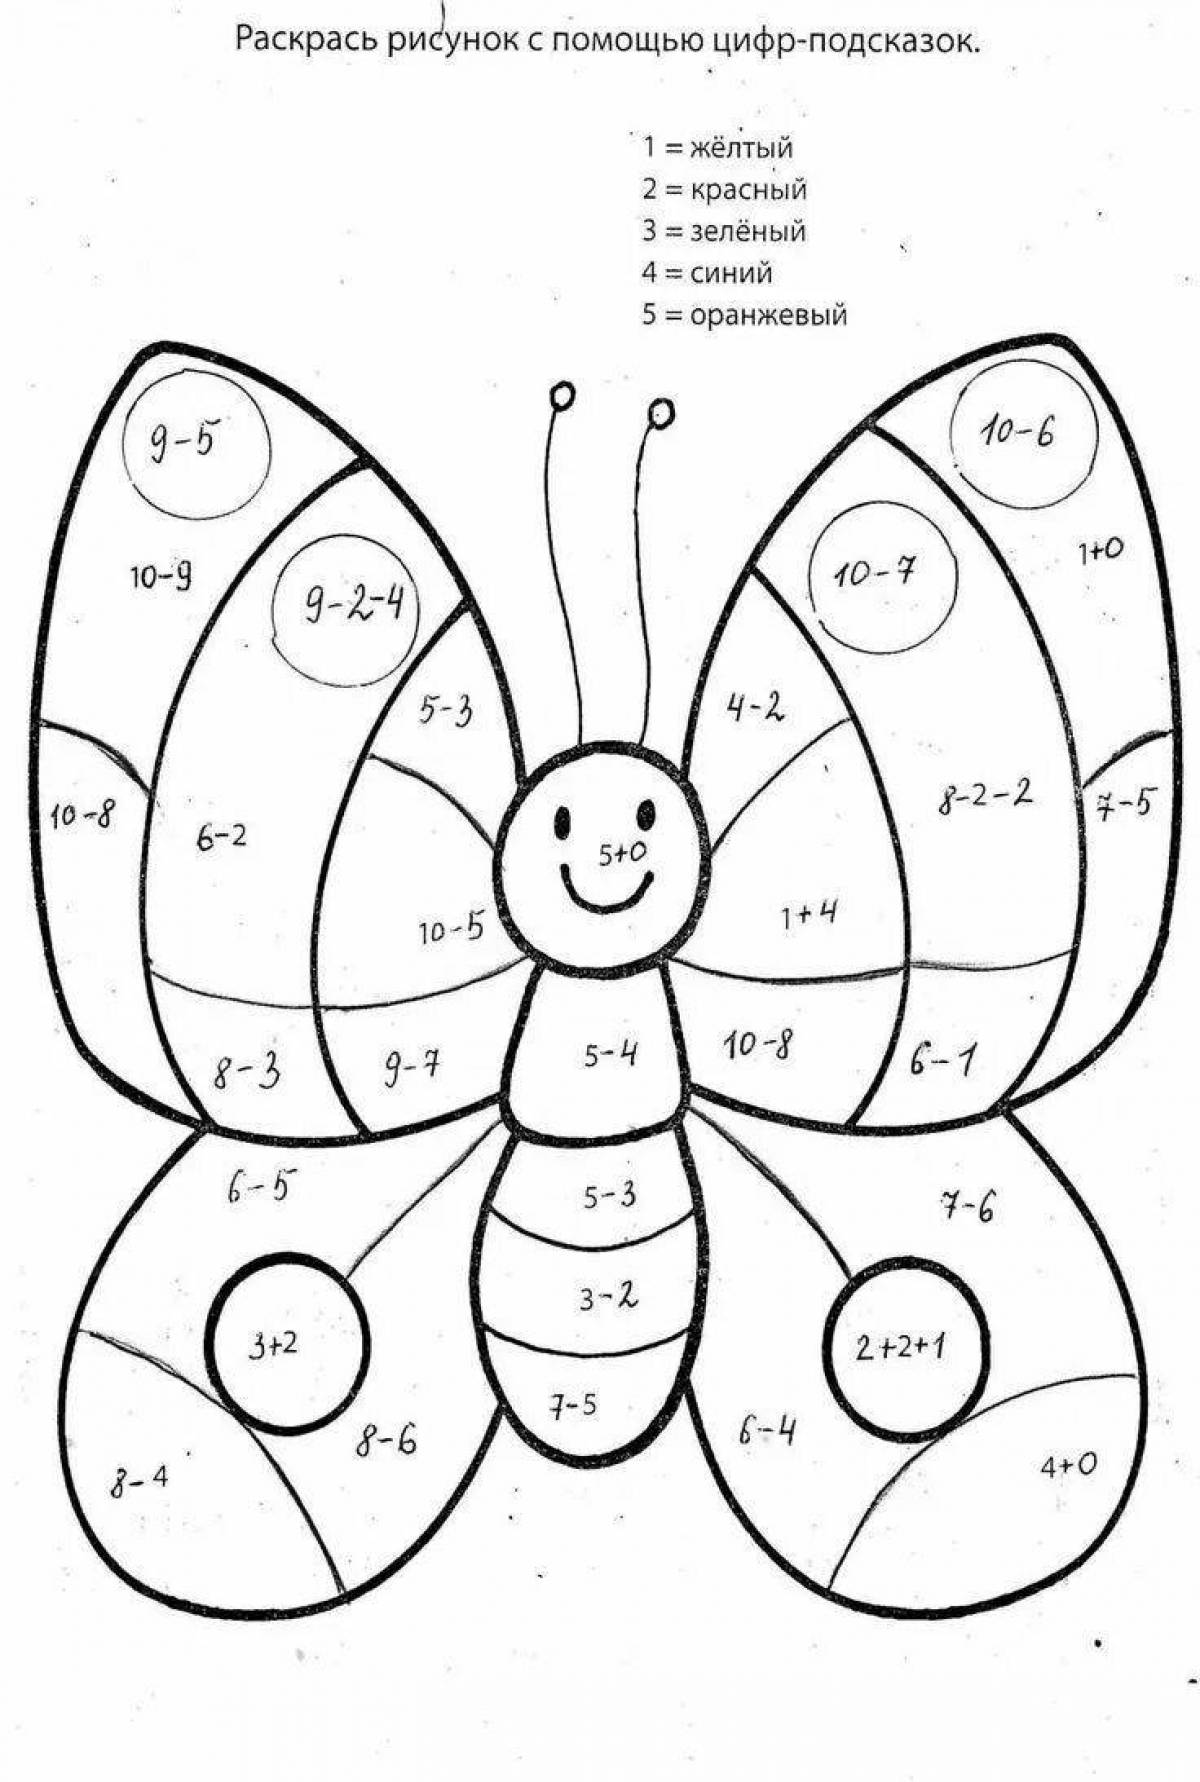 Suggestive math coloring pages for 6-7 year olds